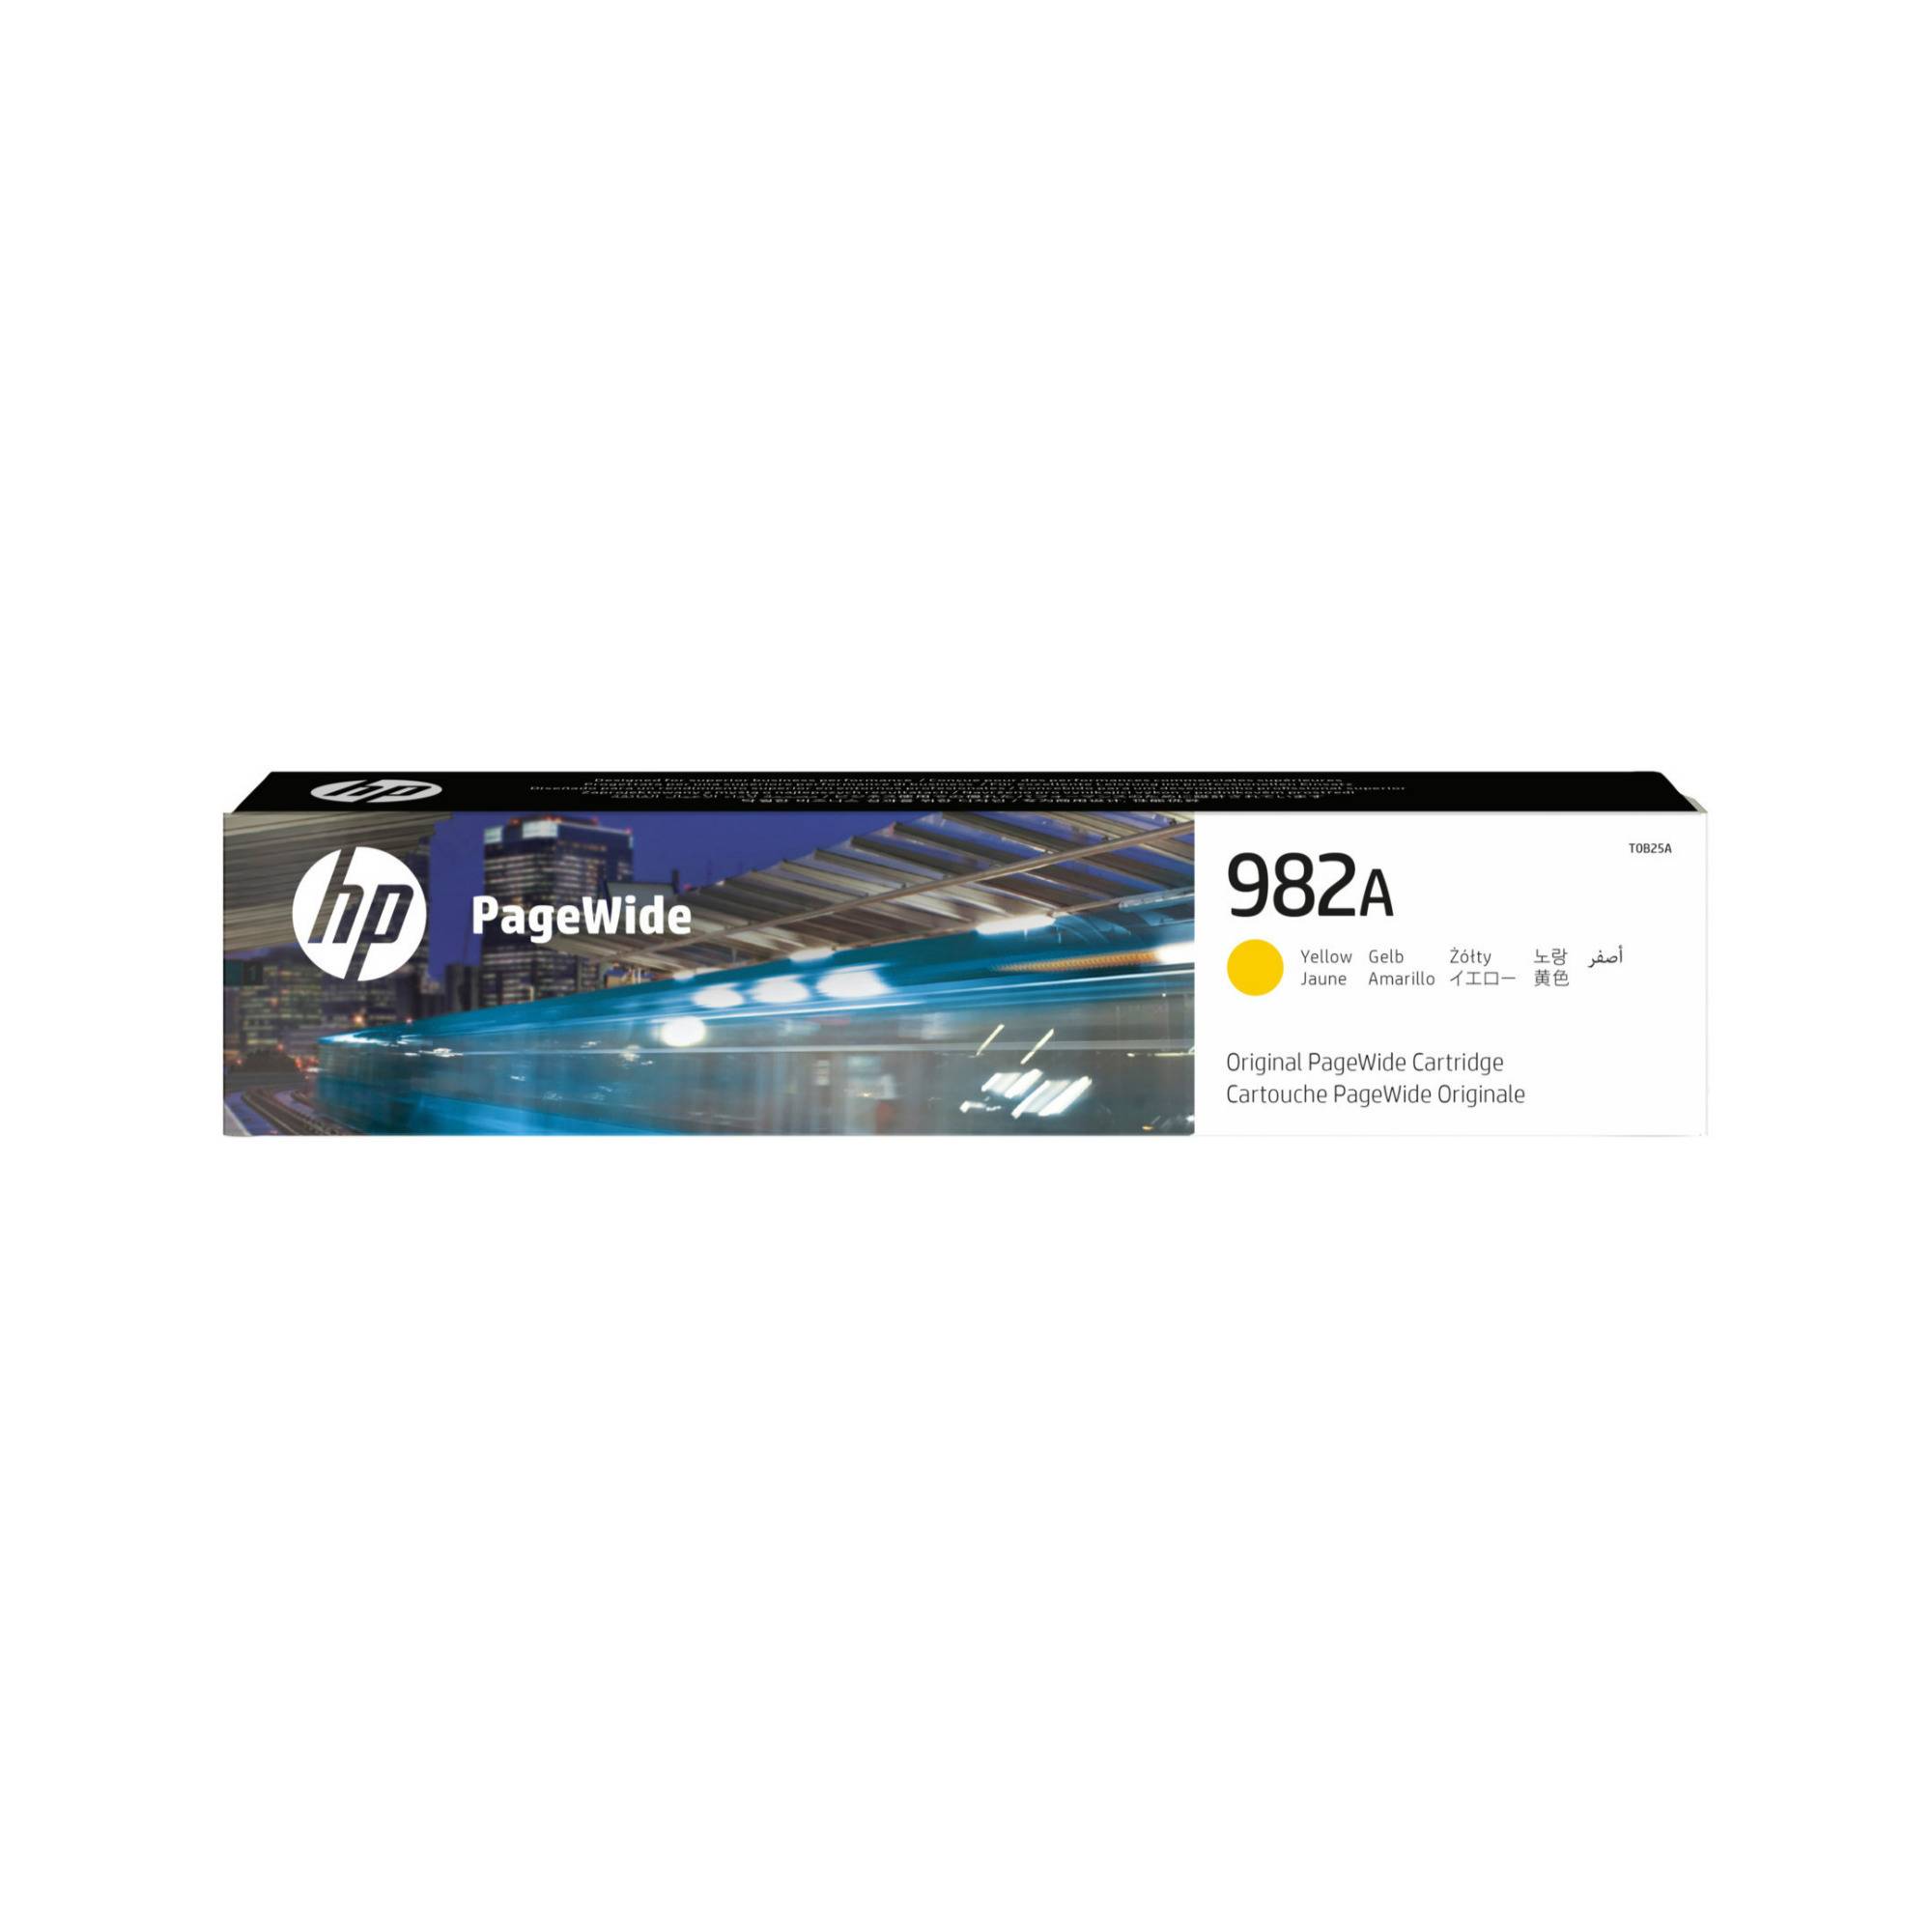 HP 982A Yellow Original Page Wide Ink Cartridge for 2x Printing (8000 Pages)